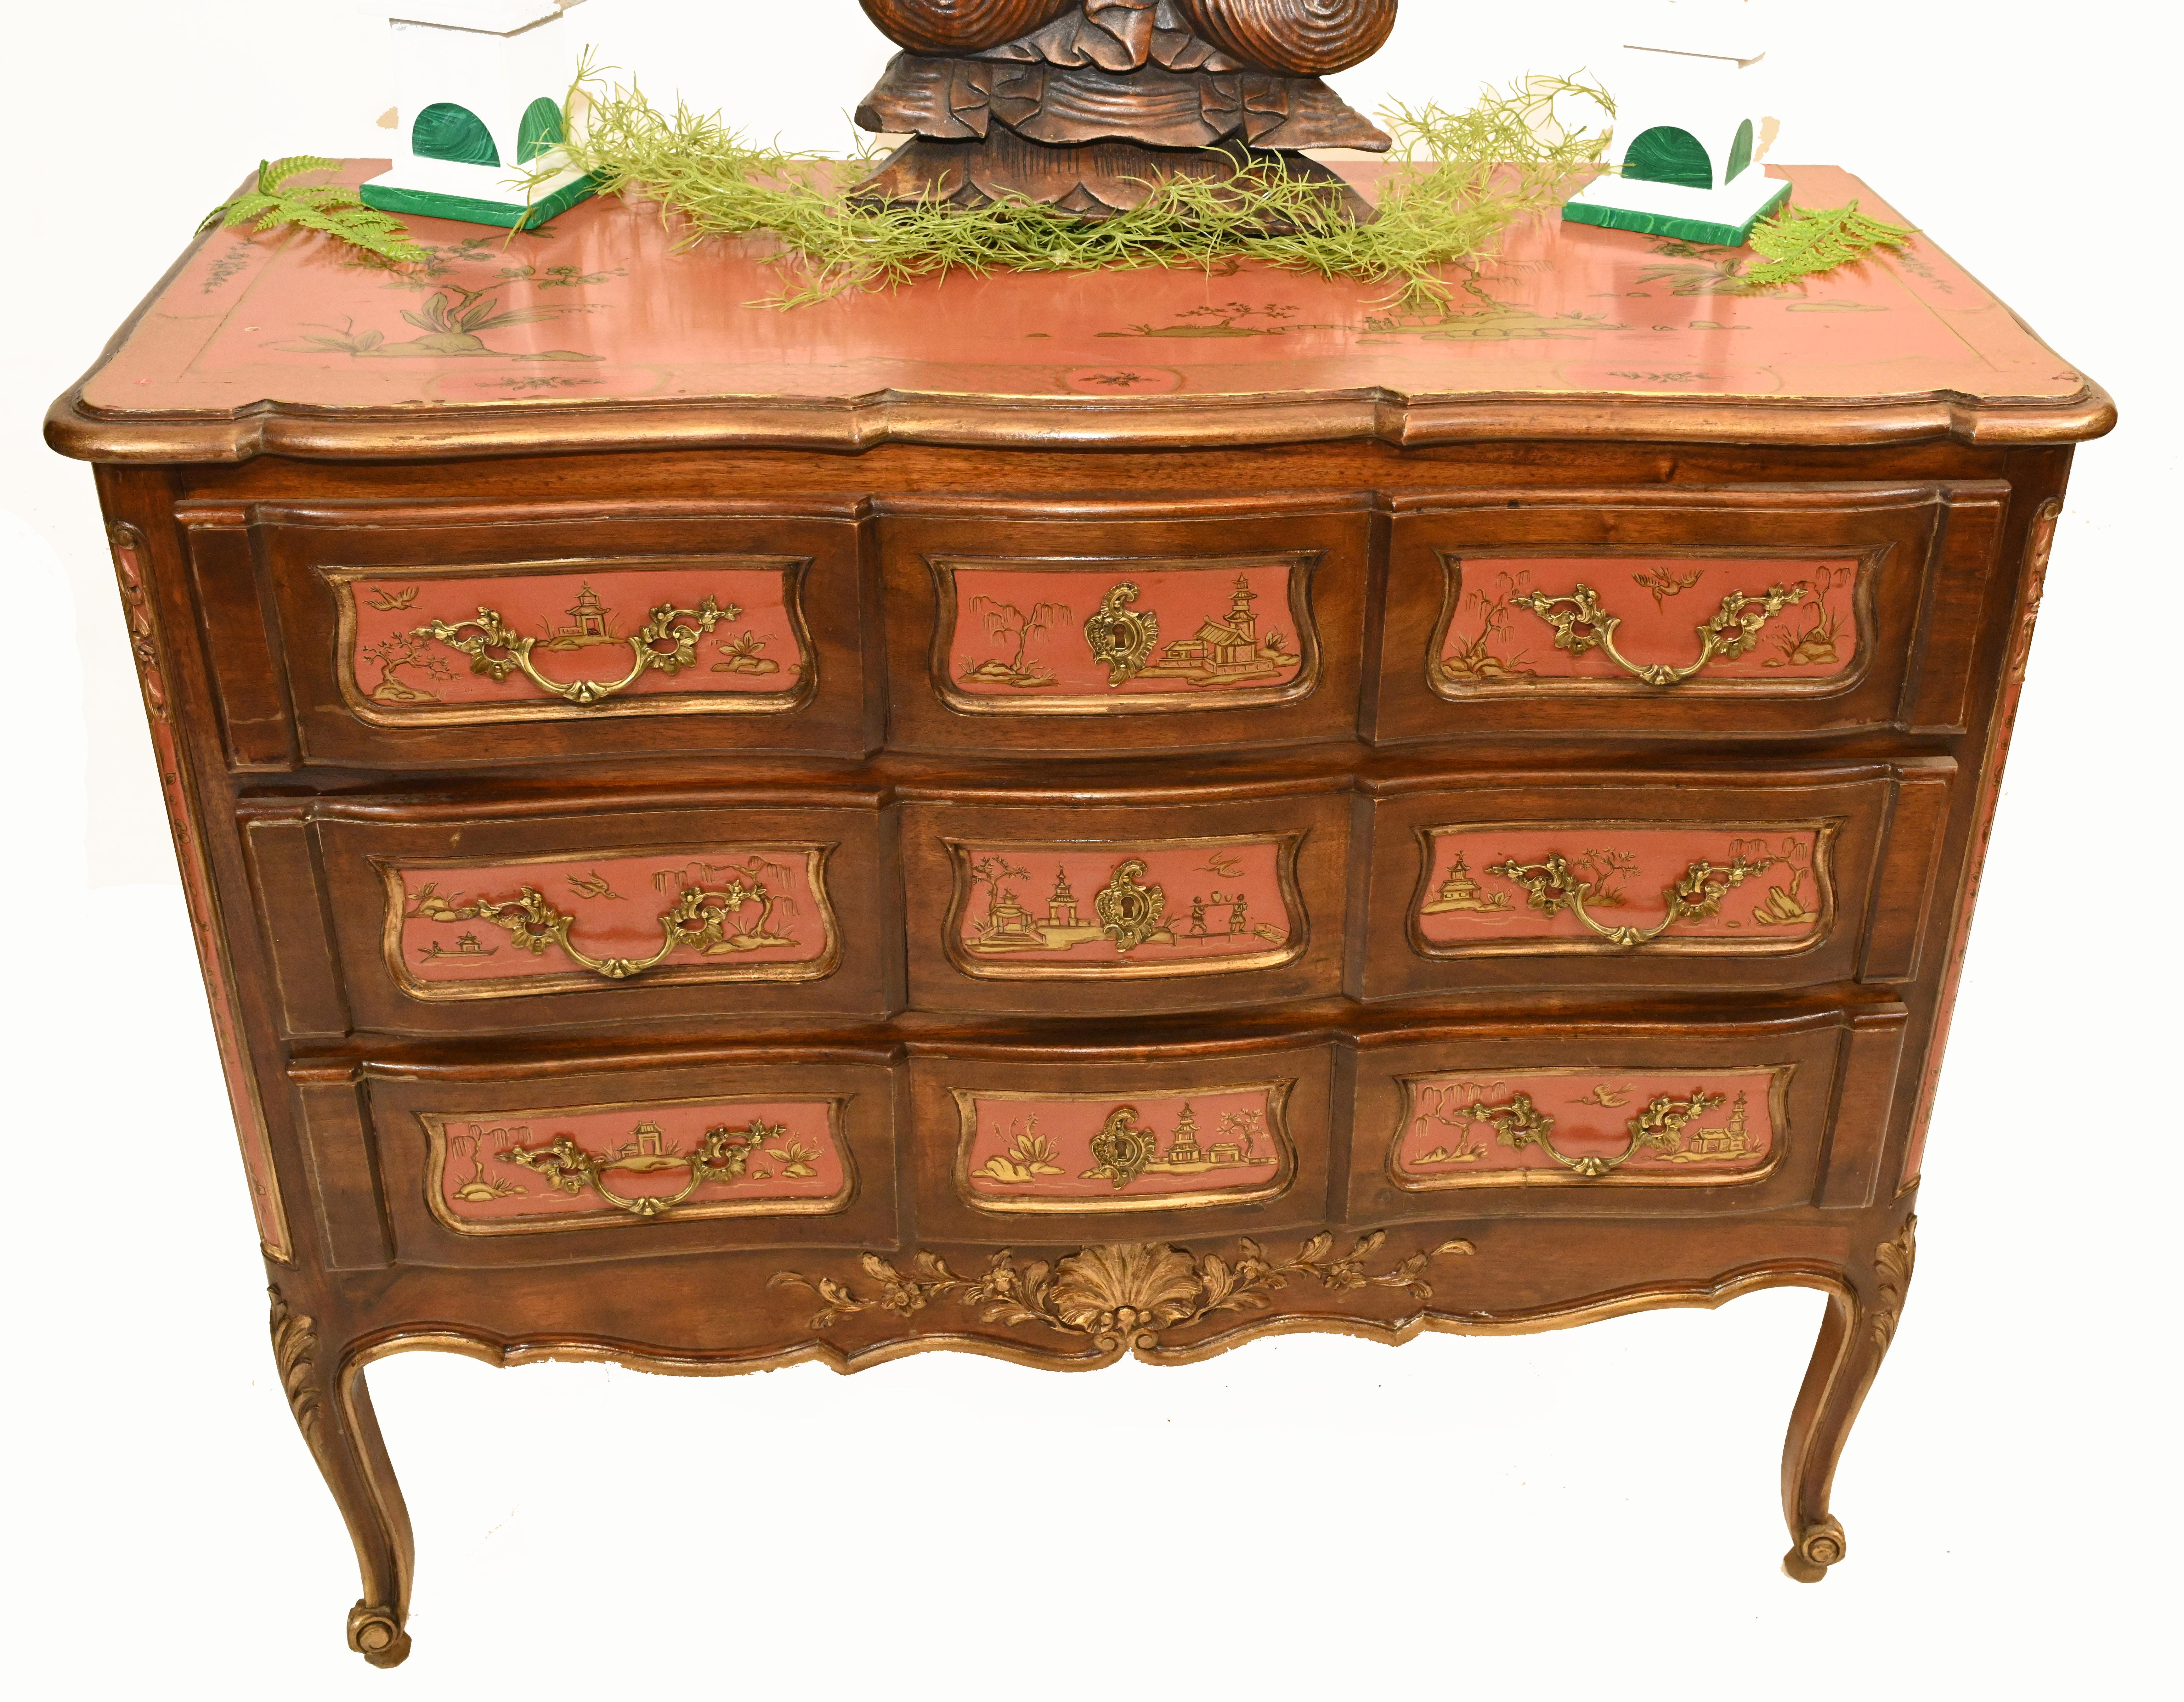 - Stunning antique Chinese red lacquer chest of drawers or commode
- We date this important piece of furniure to 1890
- With three drawers there is ample storage on this gorgeous chest
- The intricately hand painted Chinoiserie is exquisite
-